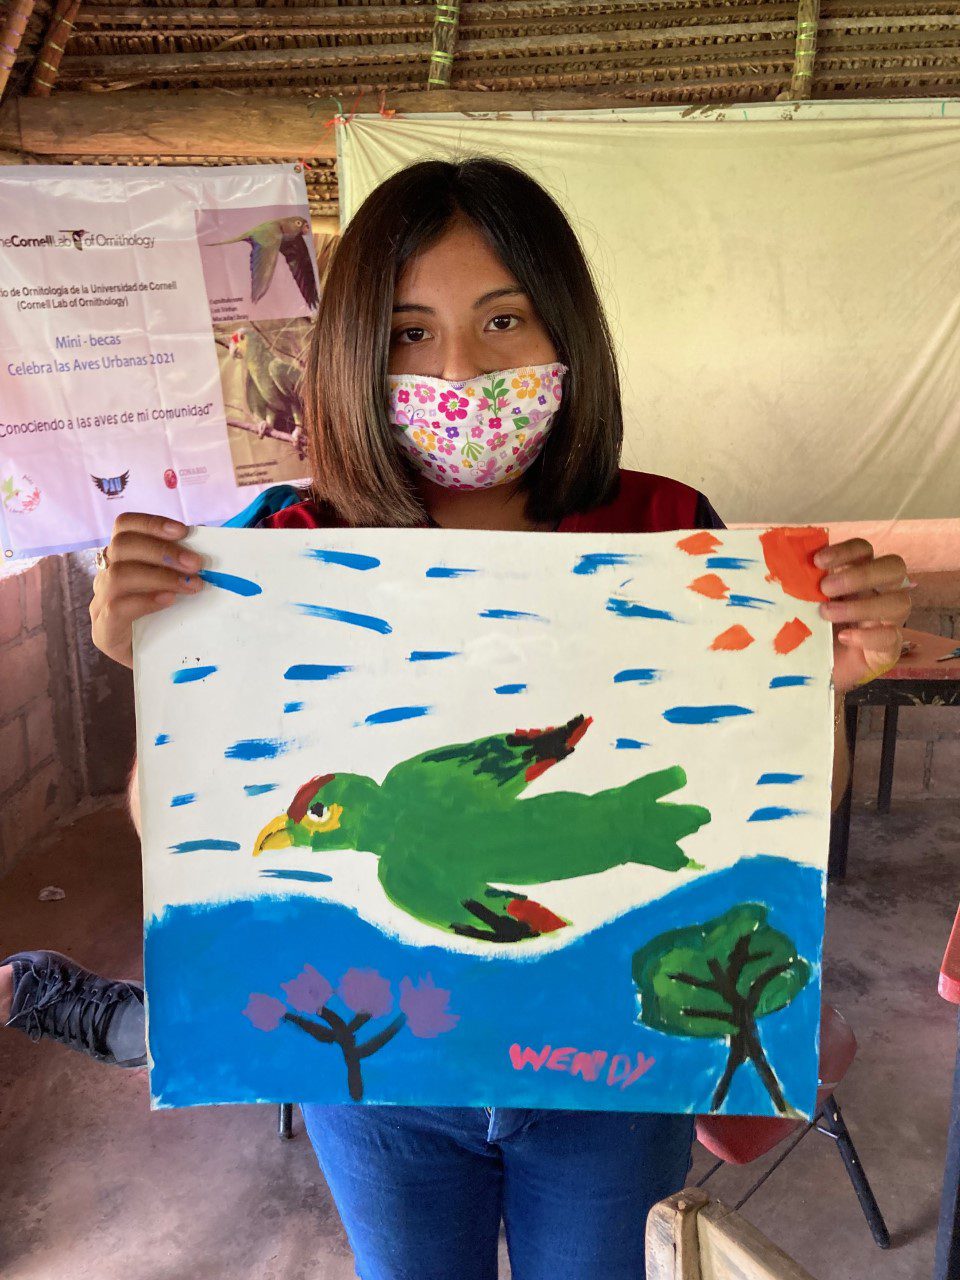 A woman in a floral facemask holds a painting of a parrot